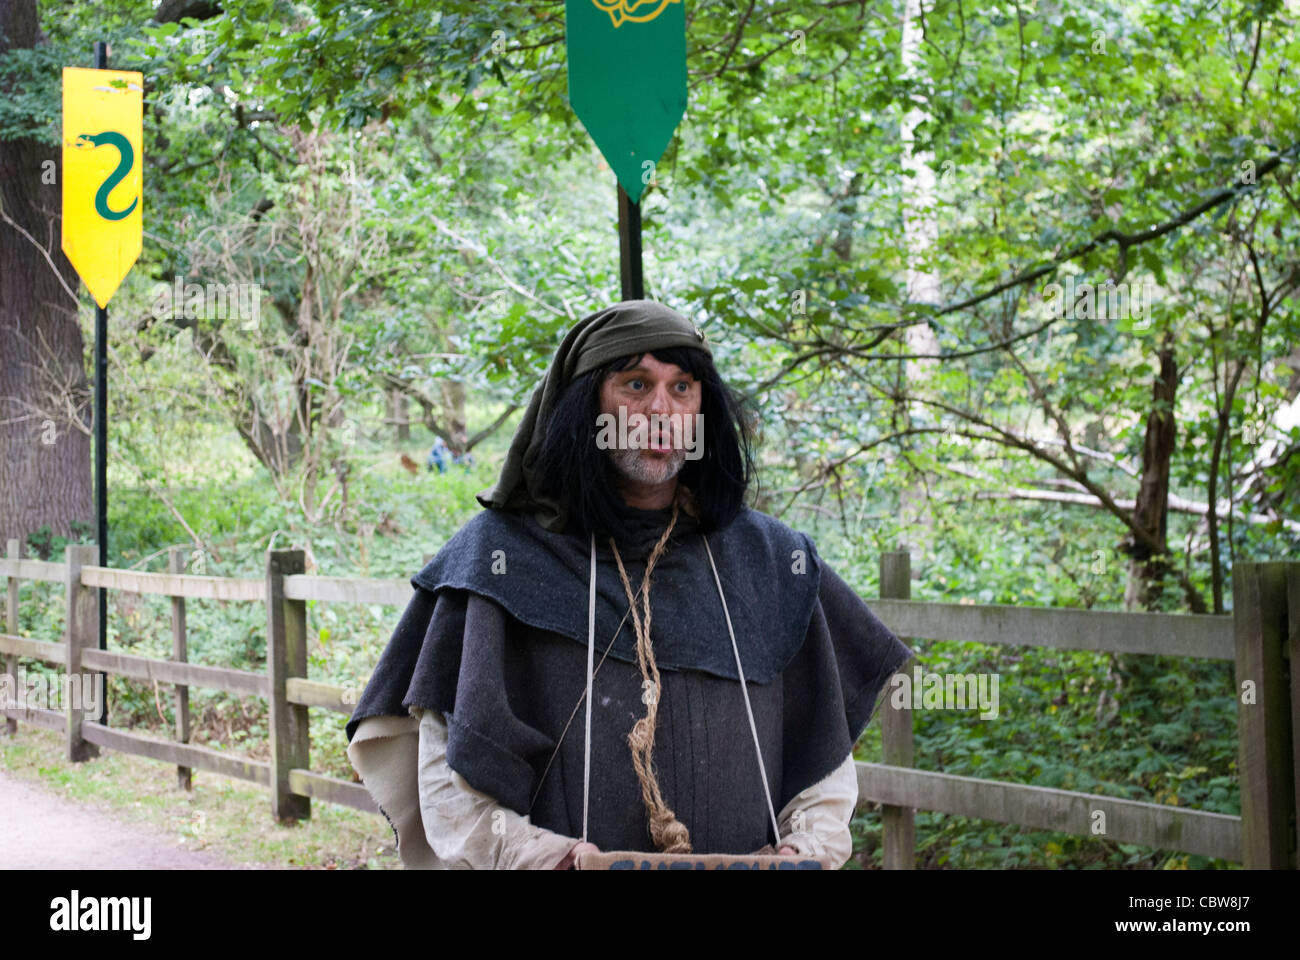 Man dressed as medieval peasant pulling a funny face walking past wooden fence with trees in background beneath green pennant Stock Photo